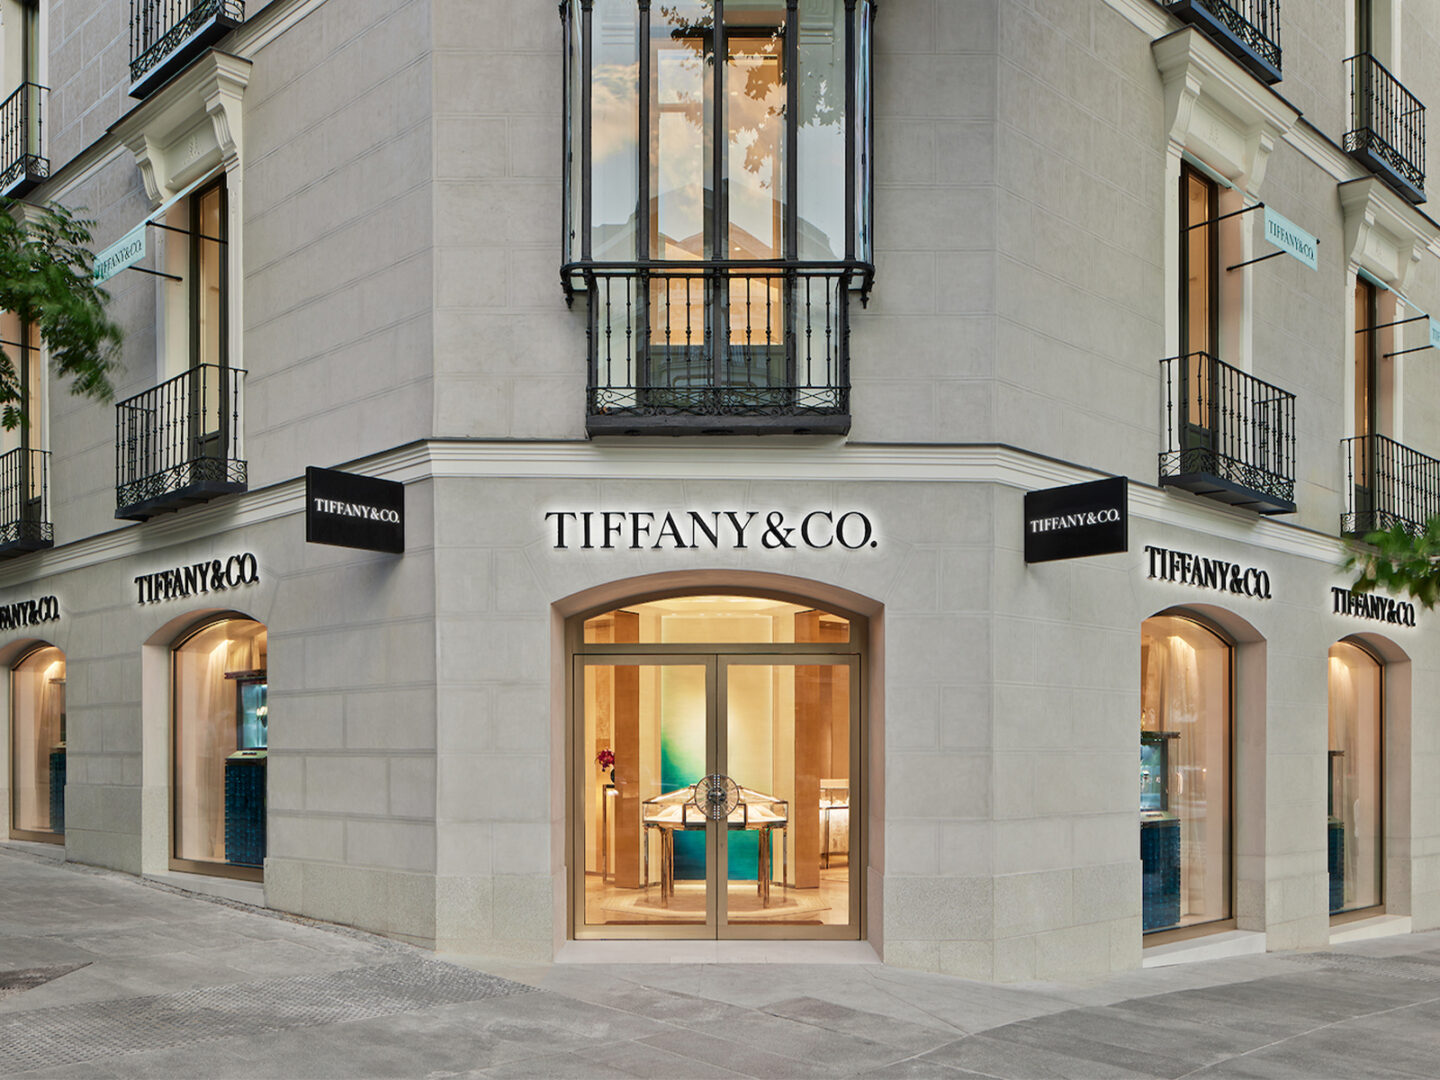 All about the opening of the new Tiffany & Co. store in Madrid